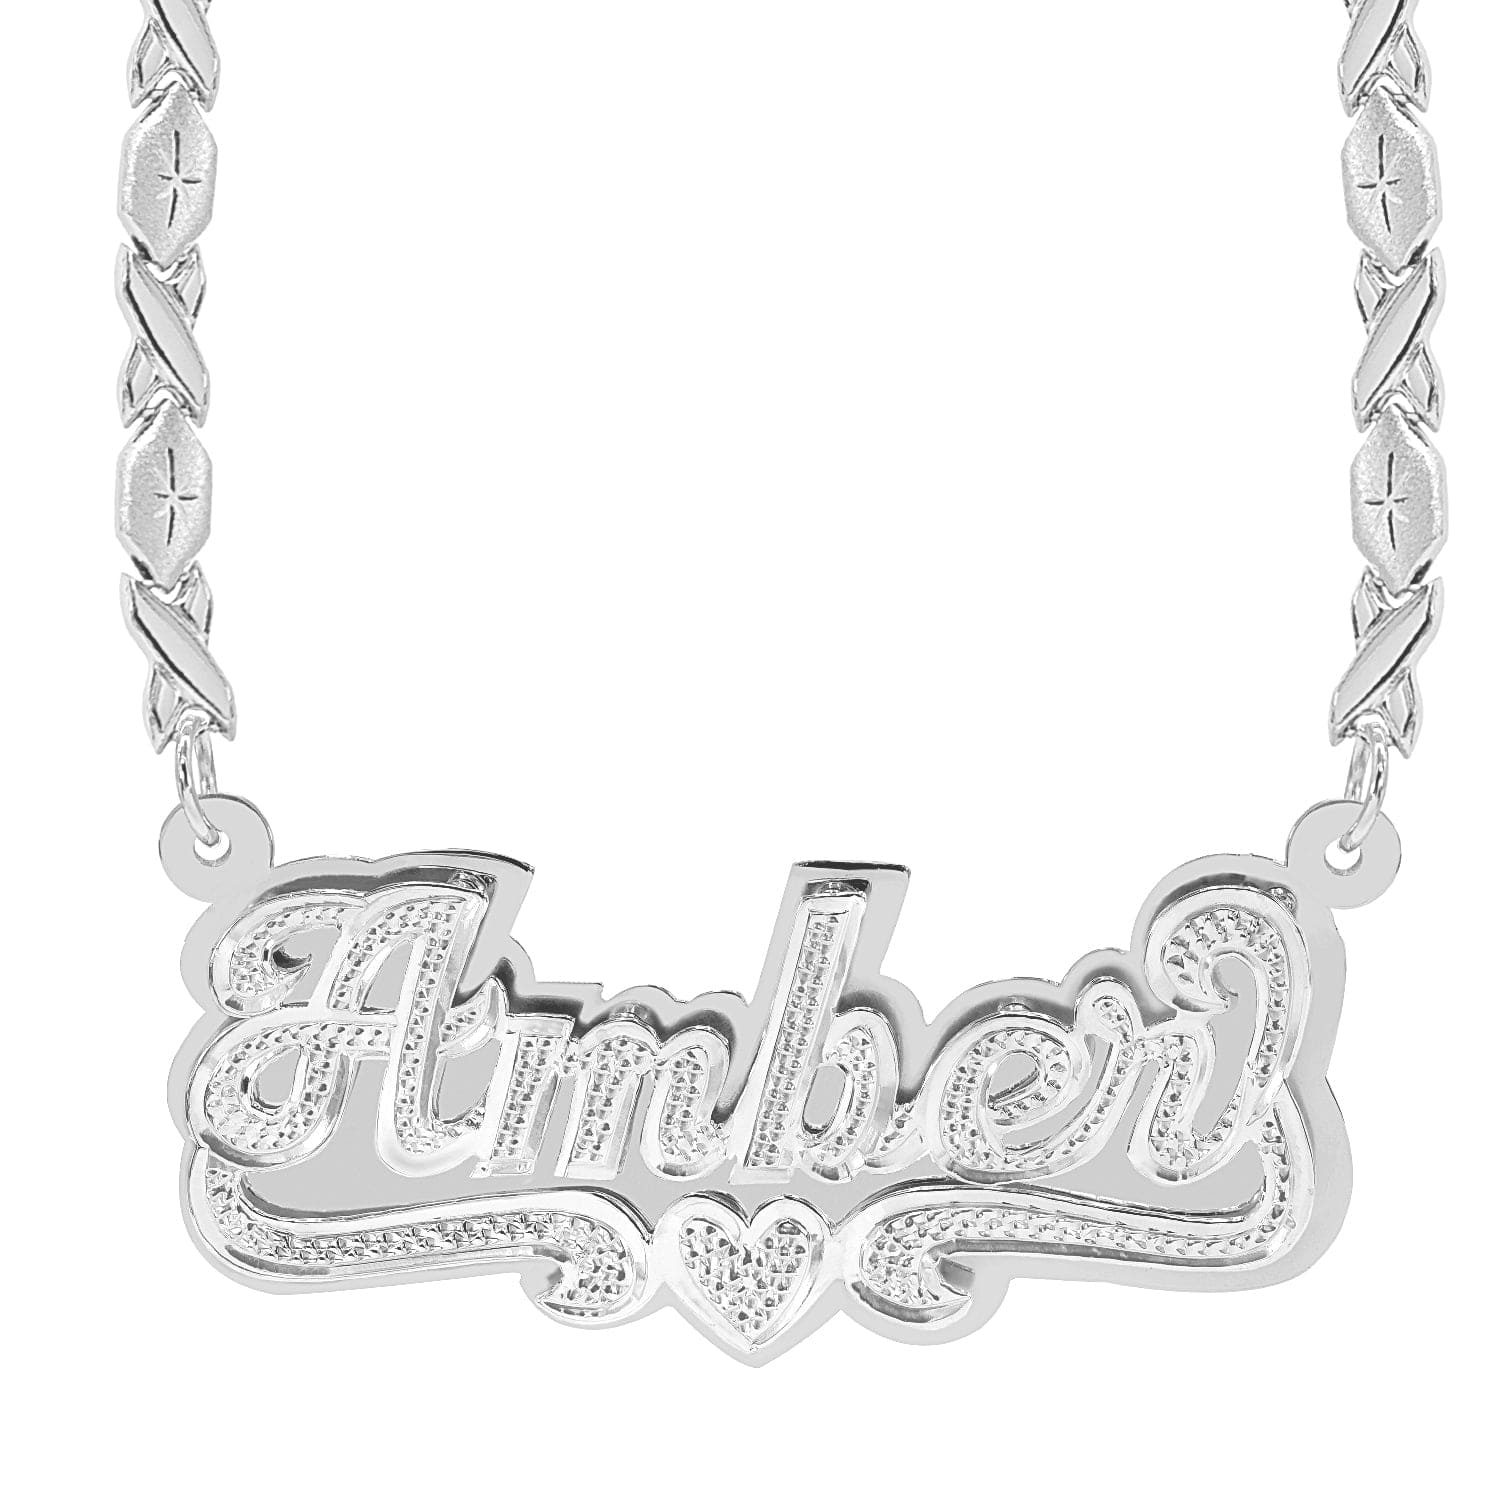 14K Gold over Sterling Silver / Xoxo Chain Personalized Double Plated Name Necklace "Amber" with Xoxo chain